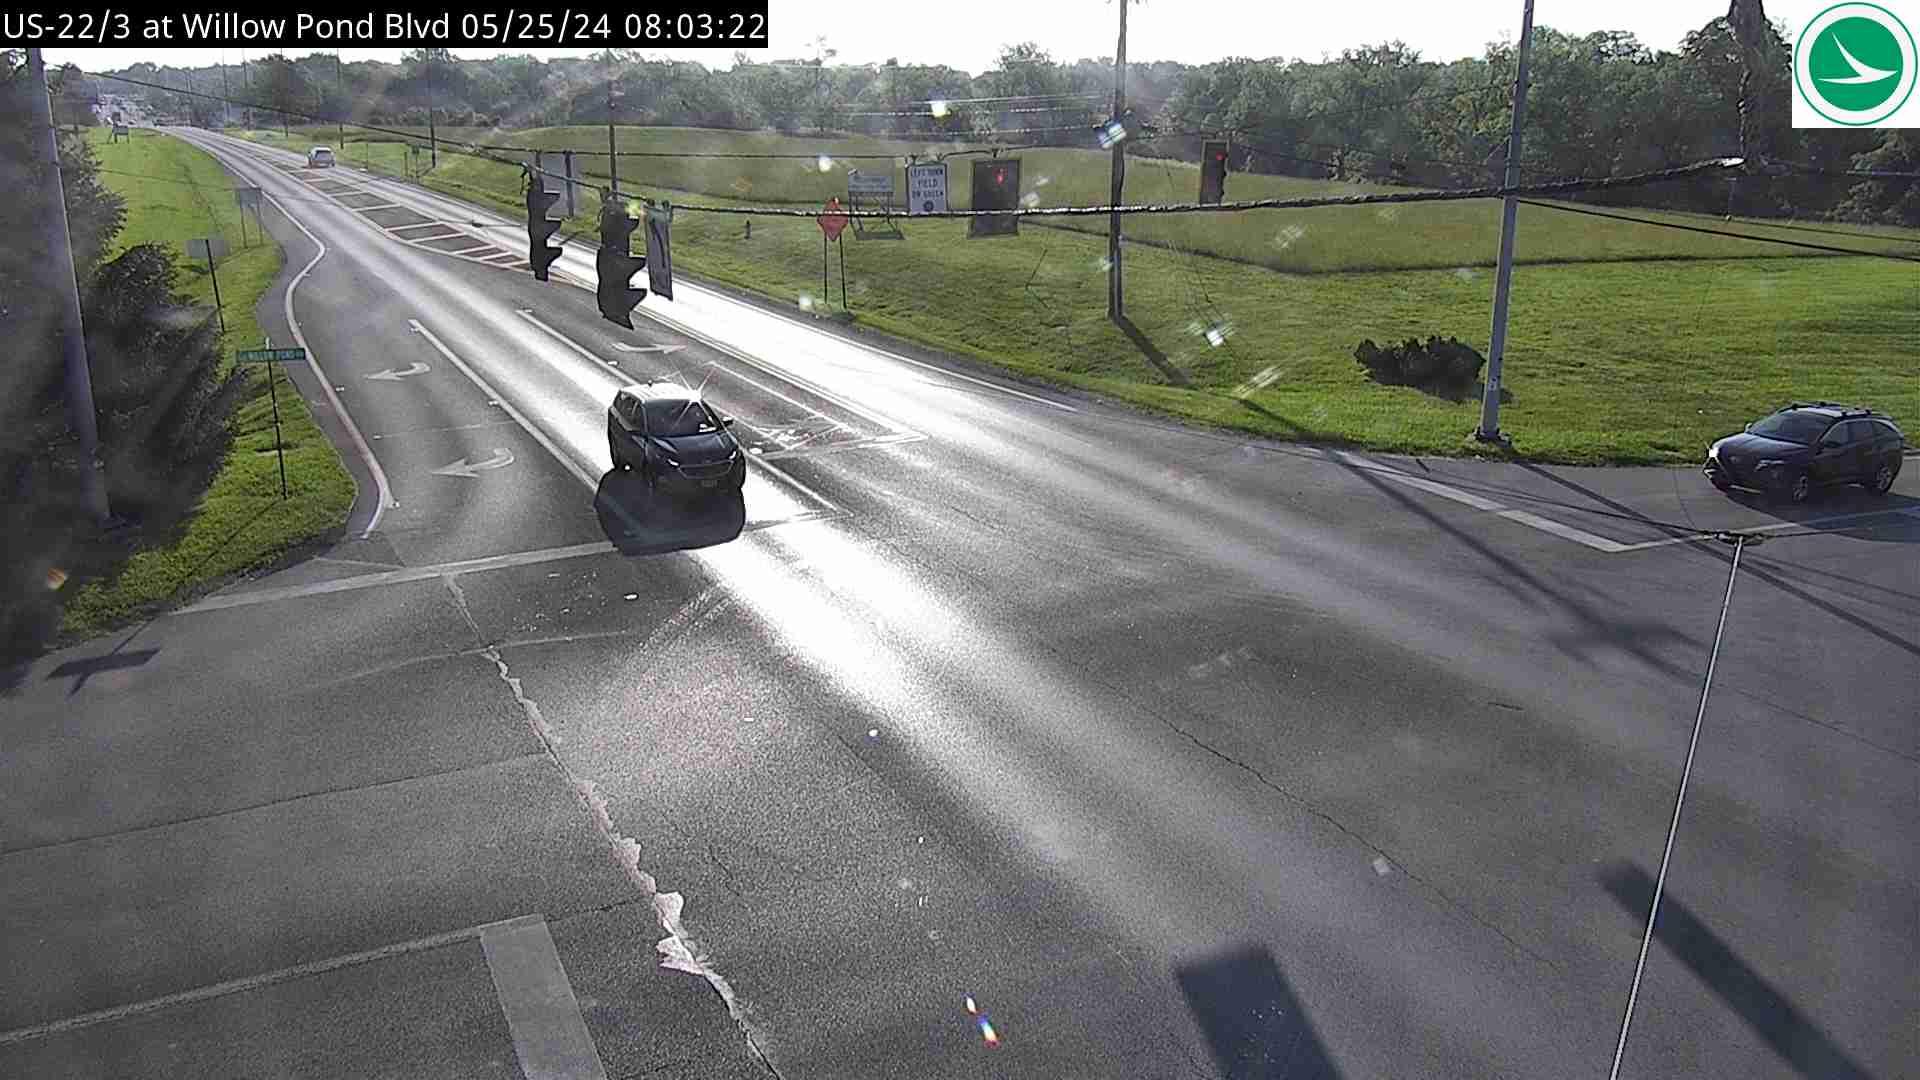 Traffic Cam Hopkinsville: US-22/3 at Willow Pond Blvd Player